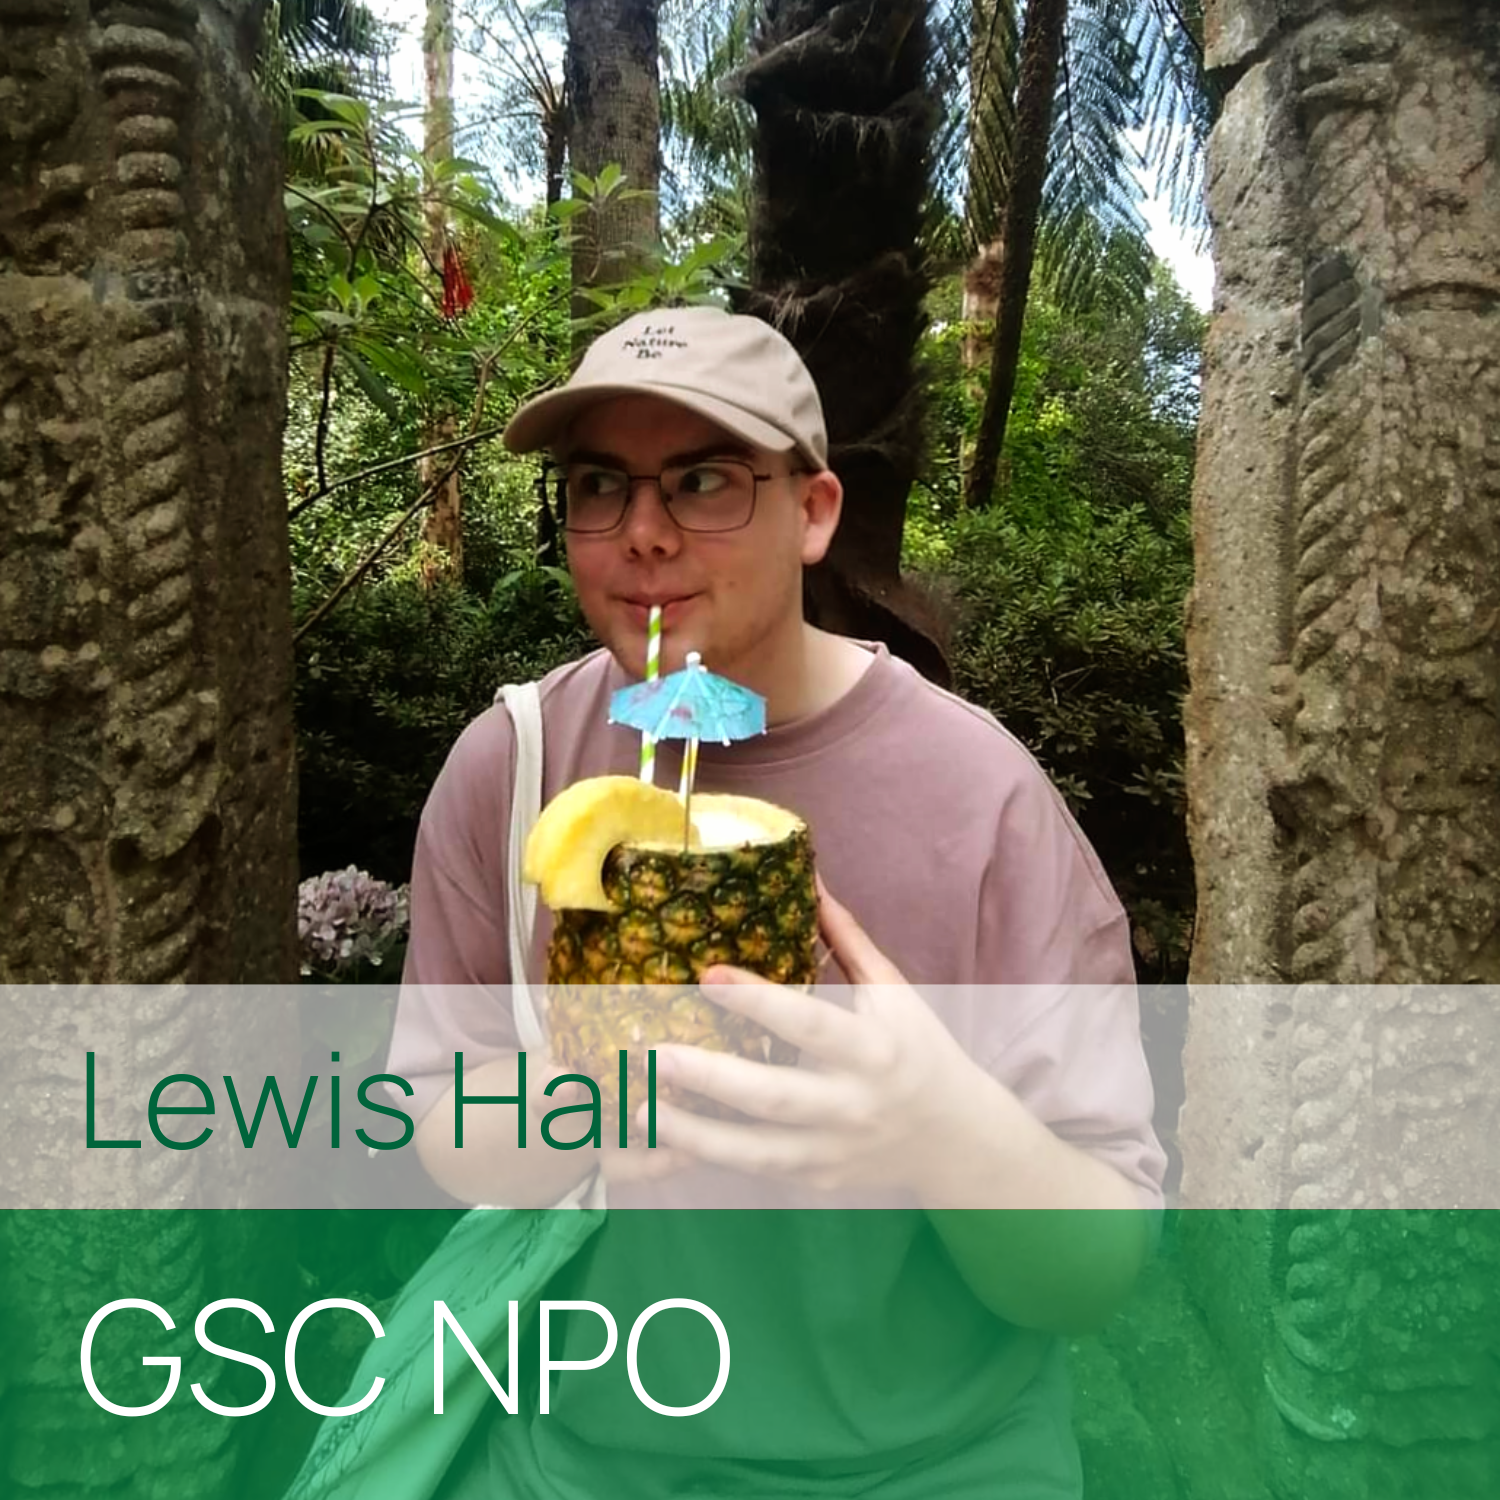 Lewis Hall, GSC NPO